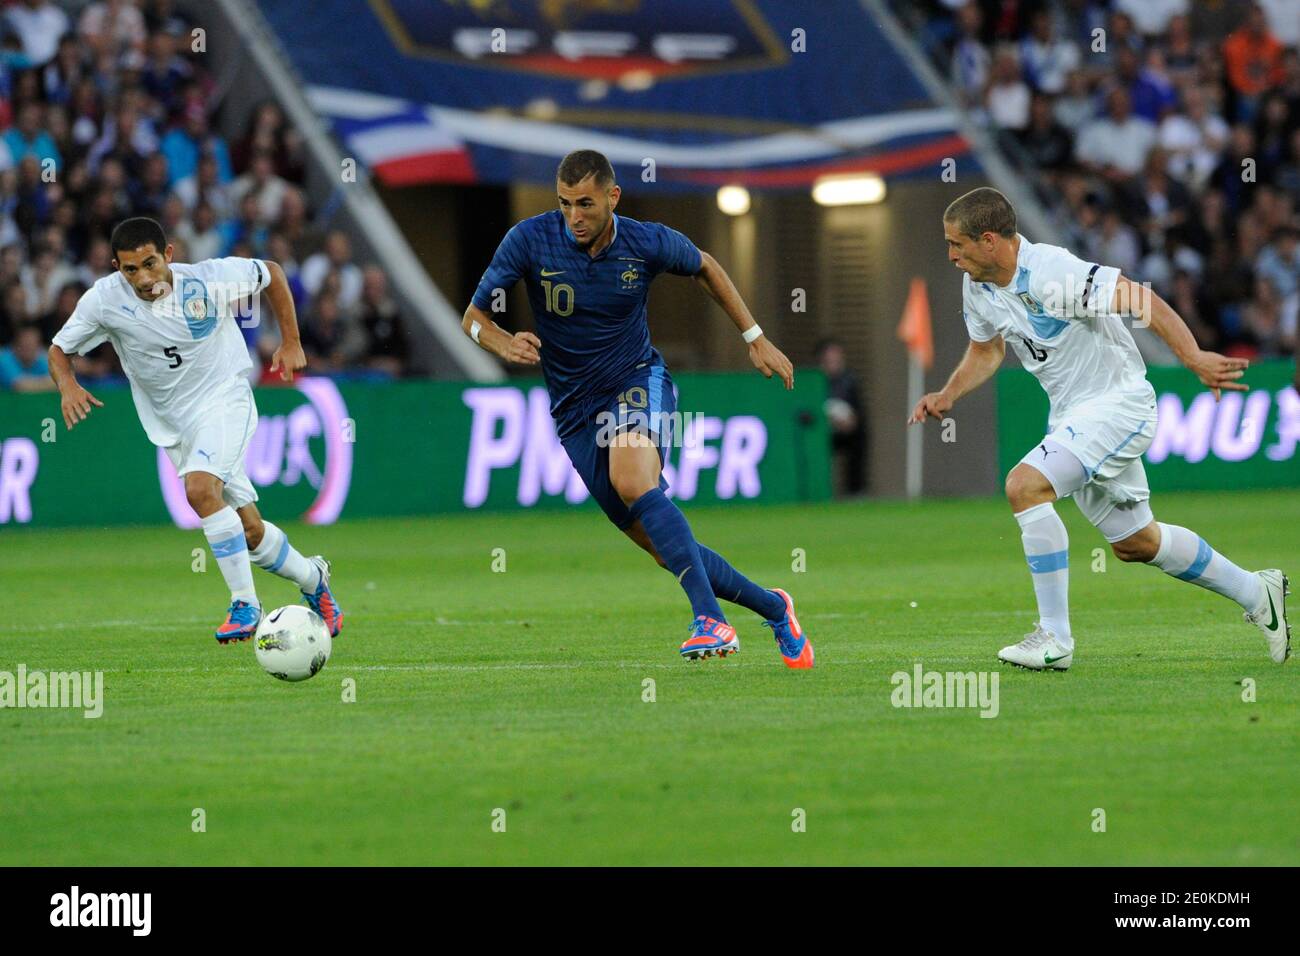 France's Karim Benzema battling Uruguay's Walter Gargano and Diego Perez during a friendly soccer match, France vs Uruguay in Le Havre, France, on August 15th, 2012. France and Uruguay drew 0-0. Photo by Henri Szwarc/ABACAPRESS.COM Stock Photo